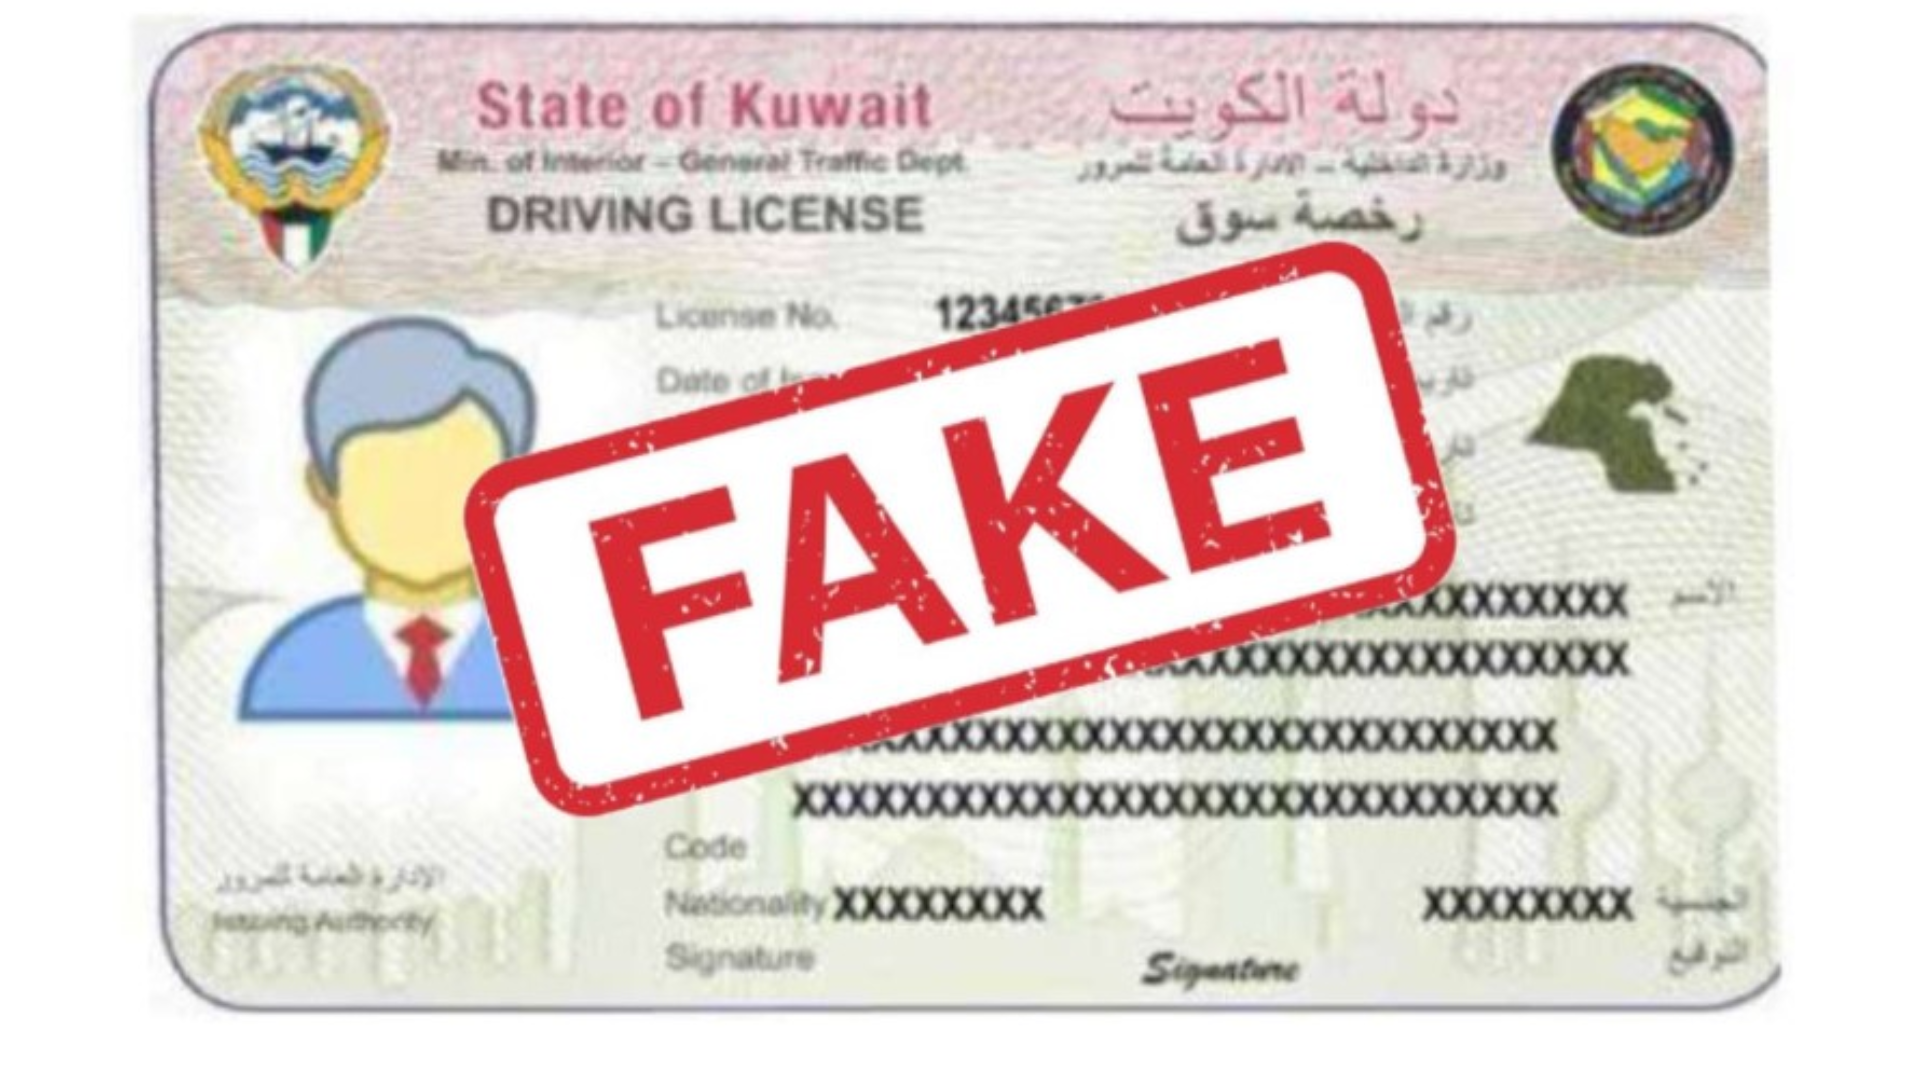 Kuwait sentences 8 expats in driving license fraud